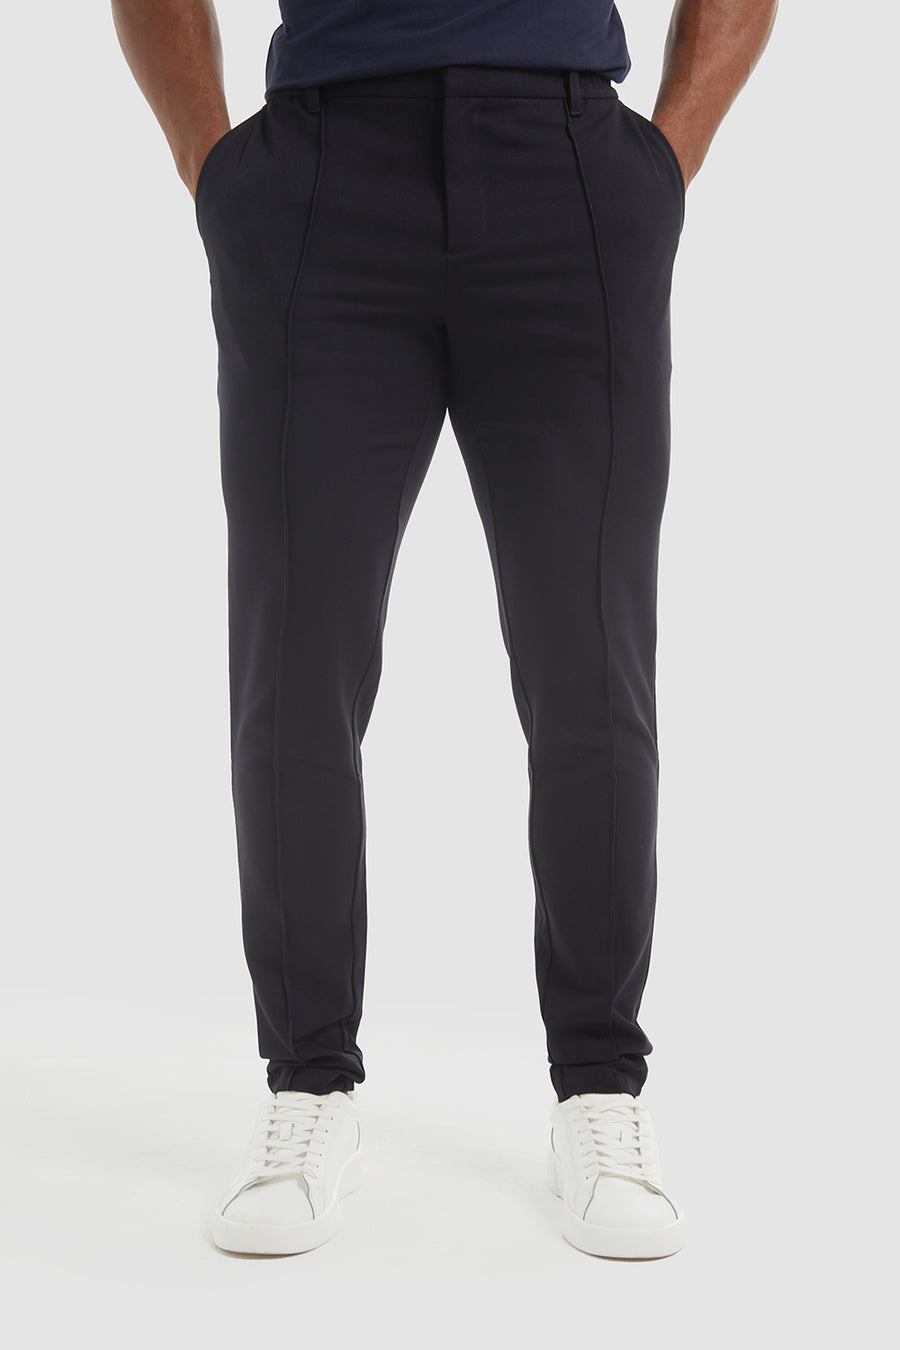 Stitched Crease Pants in Navy - TAILORED ATHLETE - USA